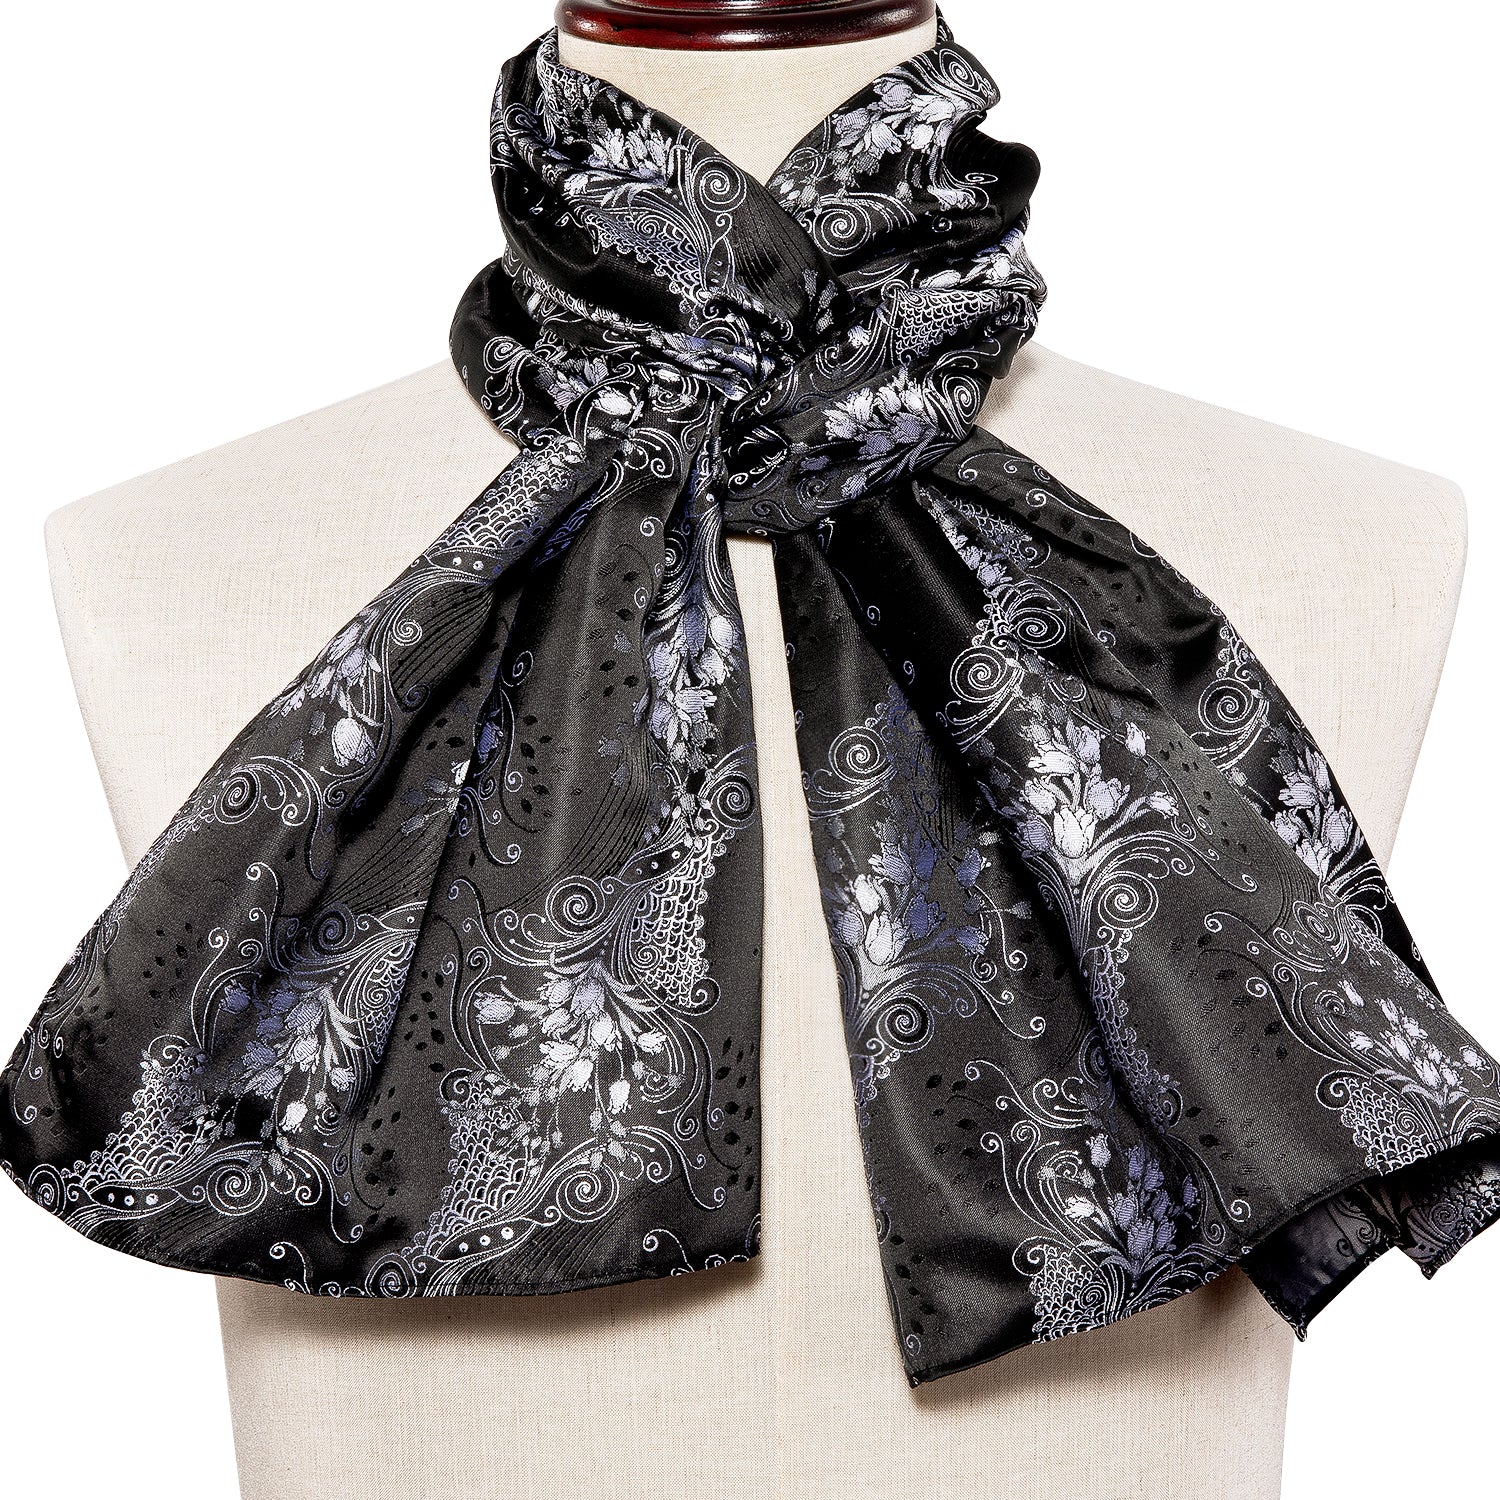 New Luxury Black Silver Floral Scarf